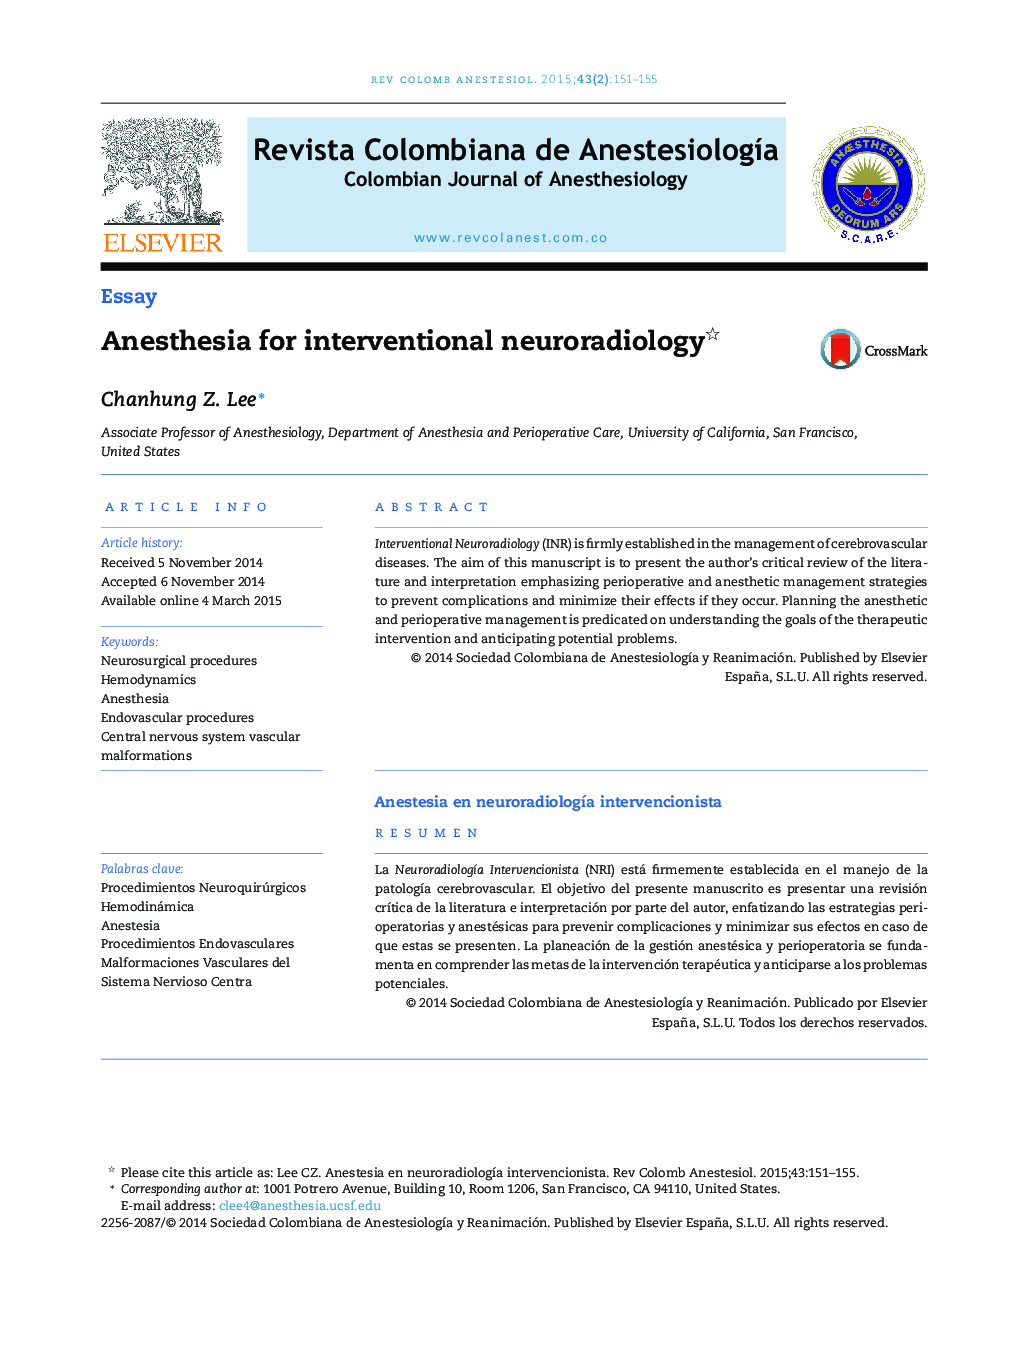 Anesthesia for interventional neuroradiology 